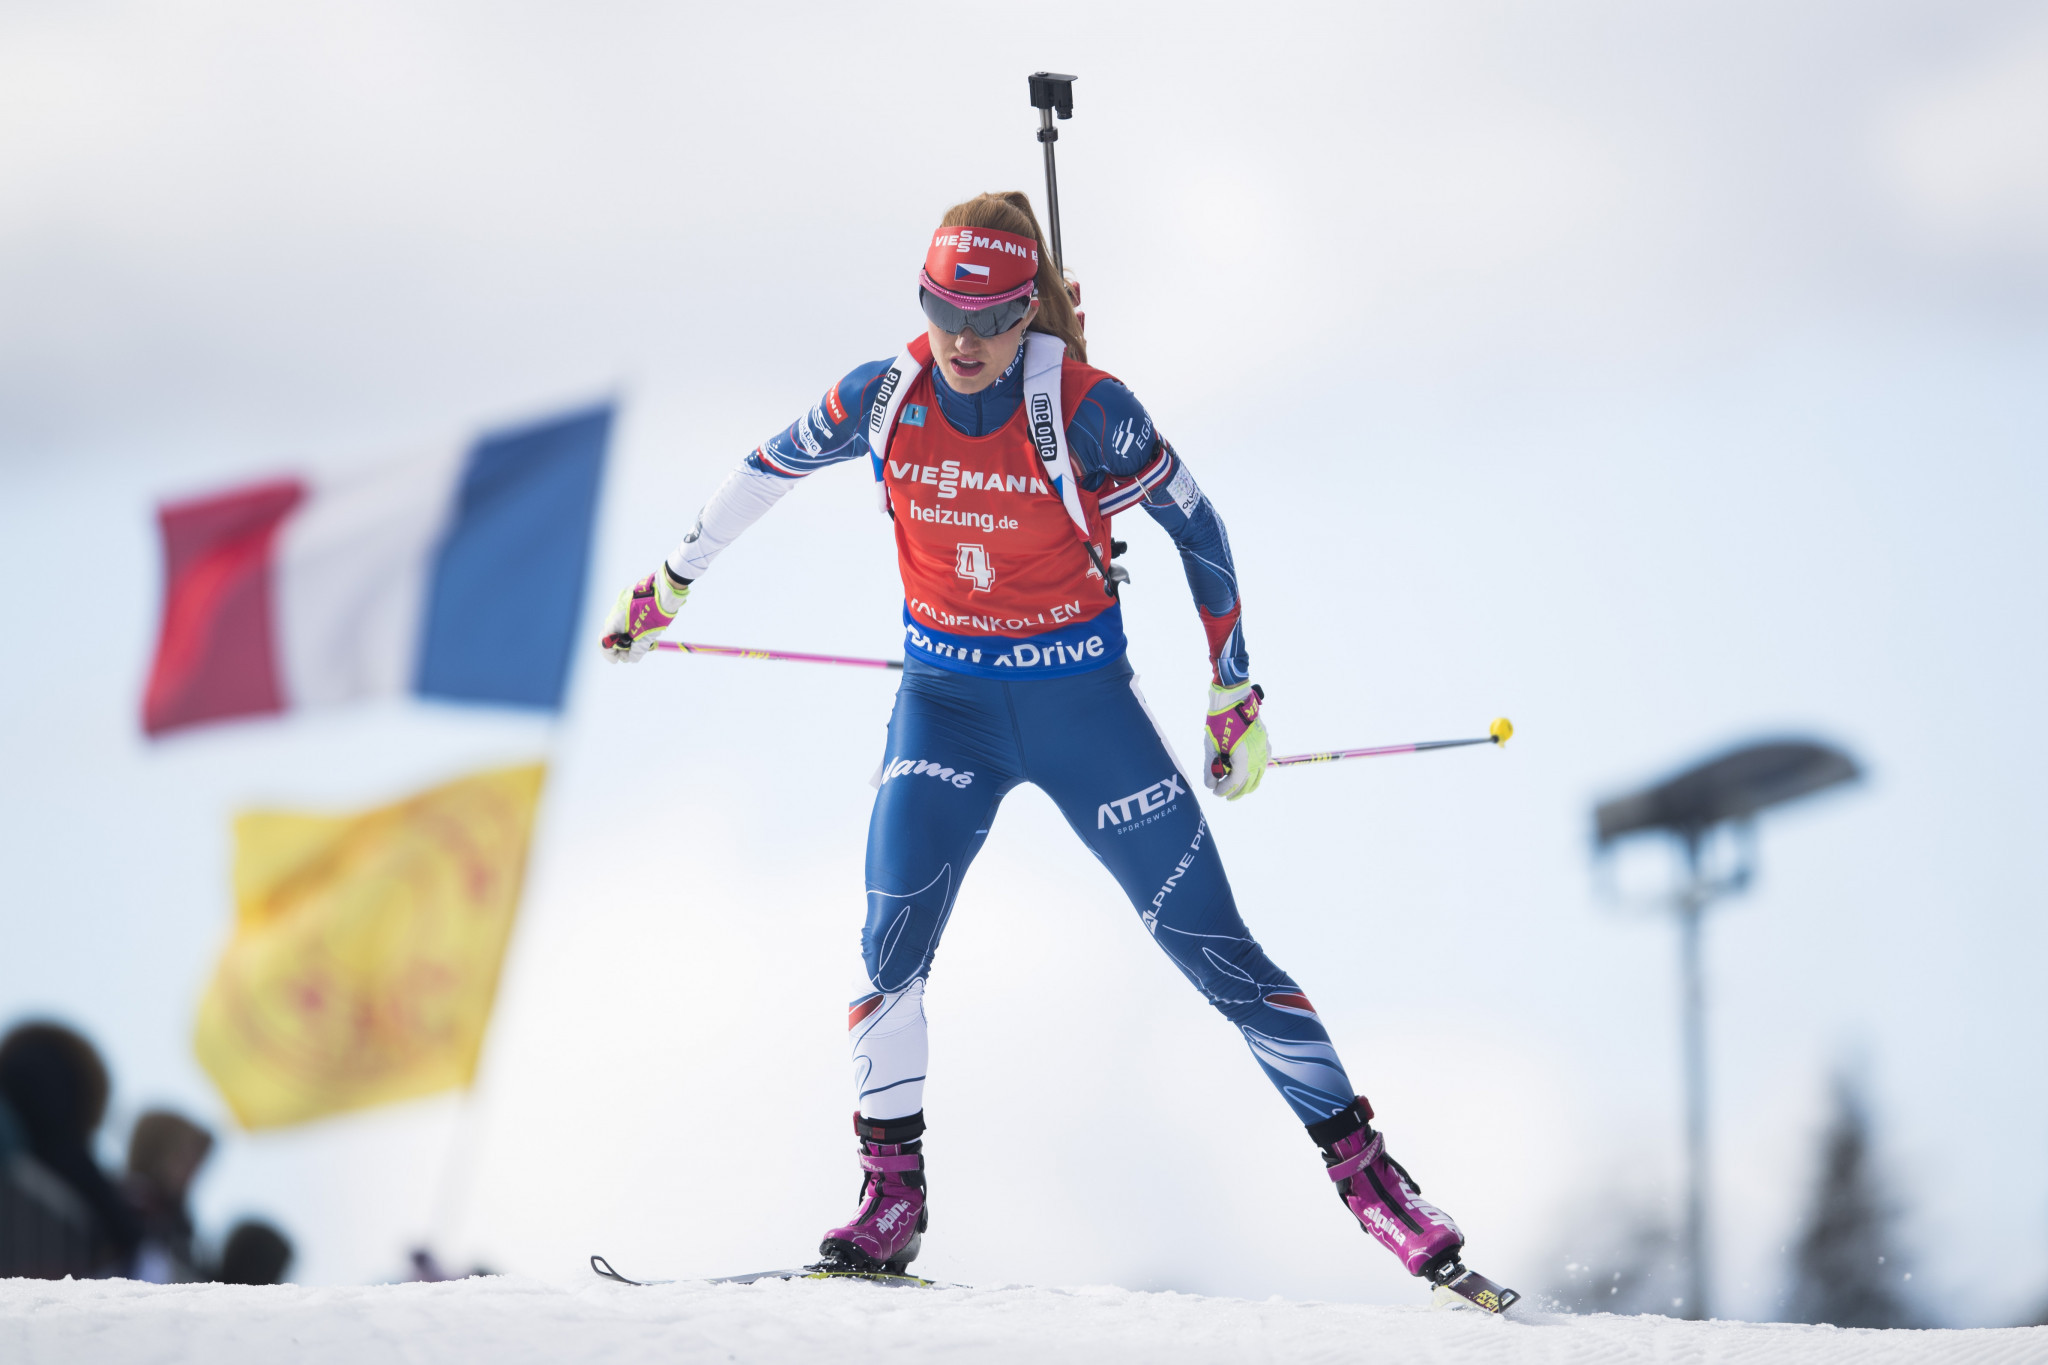 Czech Republic's Gabriela Koukalová finished her biathlon career with two world gold medals and two Olympic silver medals ©Getty Images